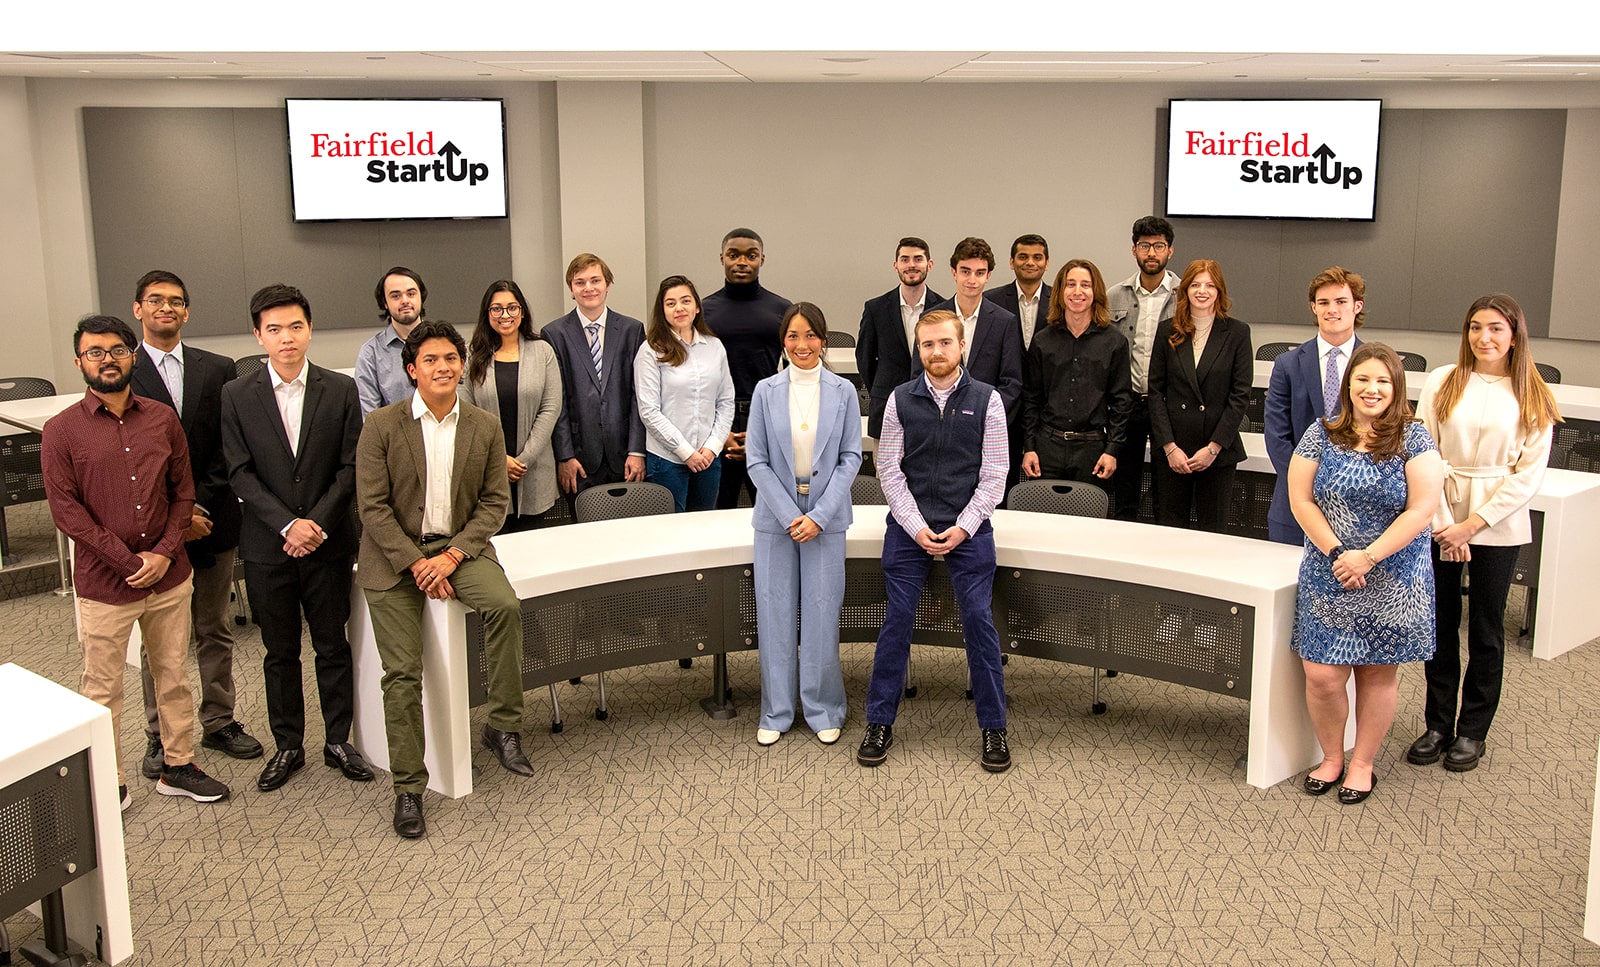 Fairfield University students who make up the various teams for the StartUp Showcase.